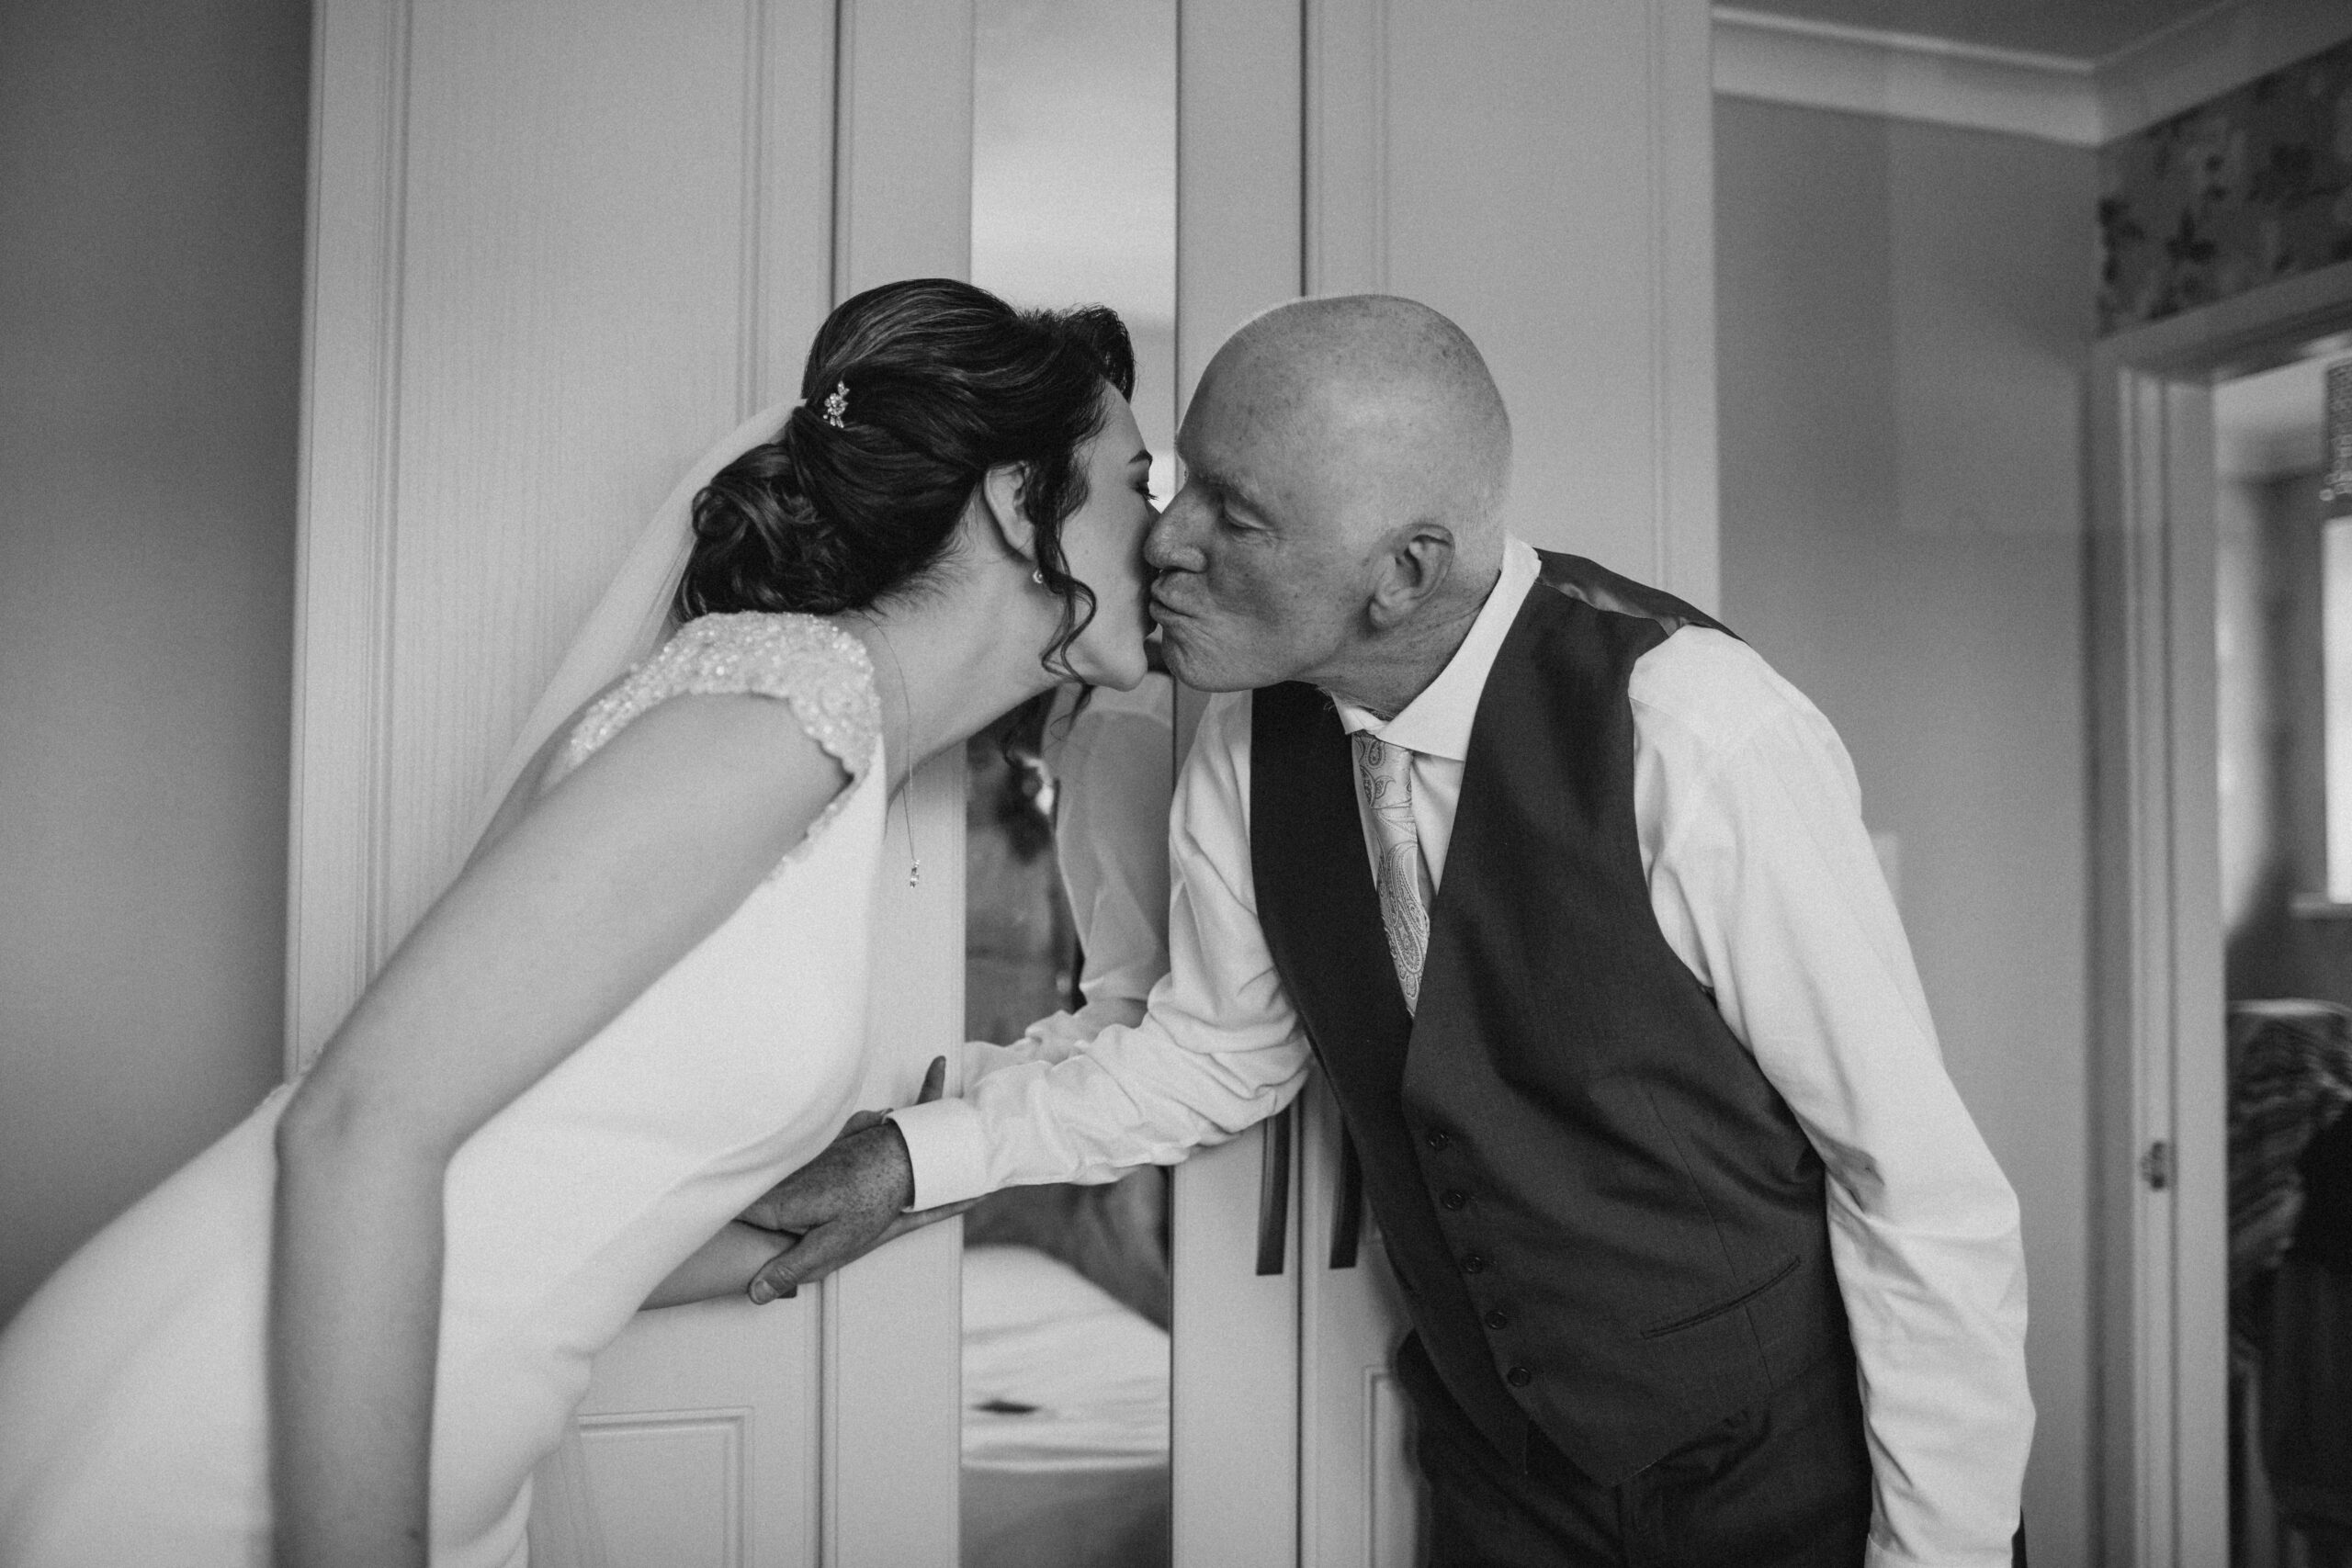 bride's dad seeing bride in dress for first time, kissing her on cheek, black and white image